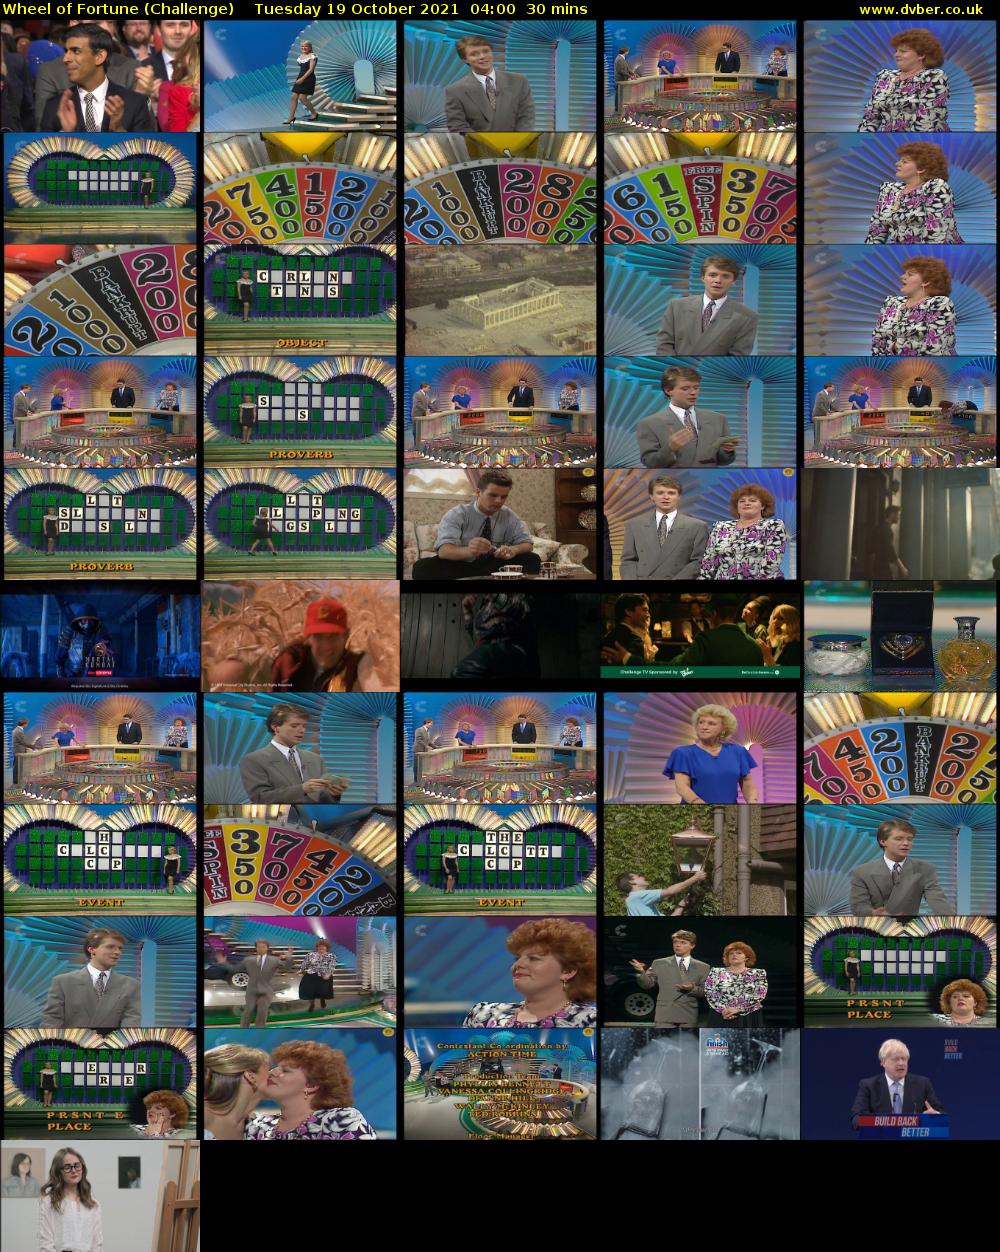 Wheel of Fortune (Challenge) Tuesday 19 October 2021 04:00 - 04:30